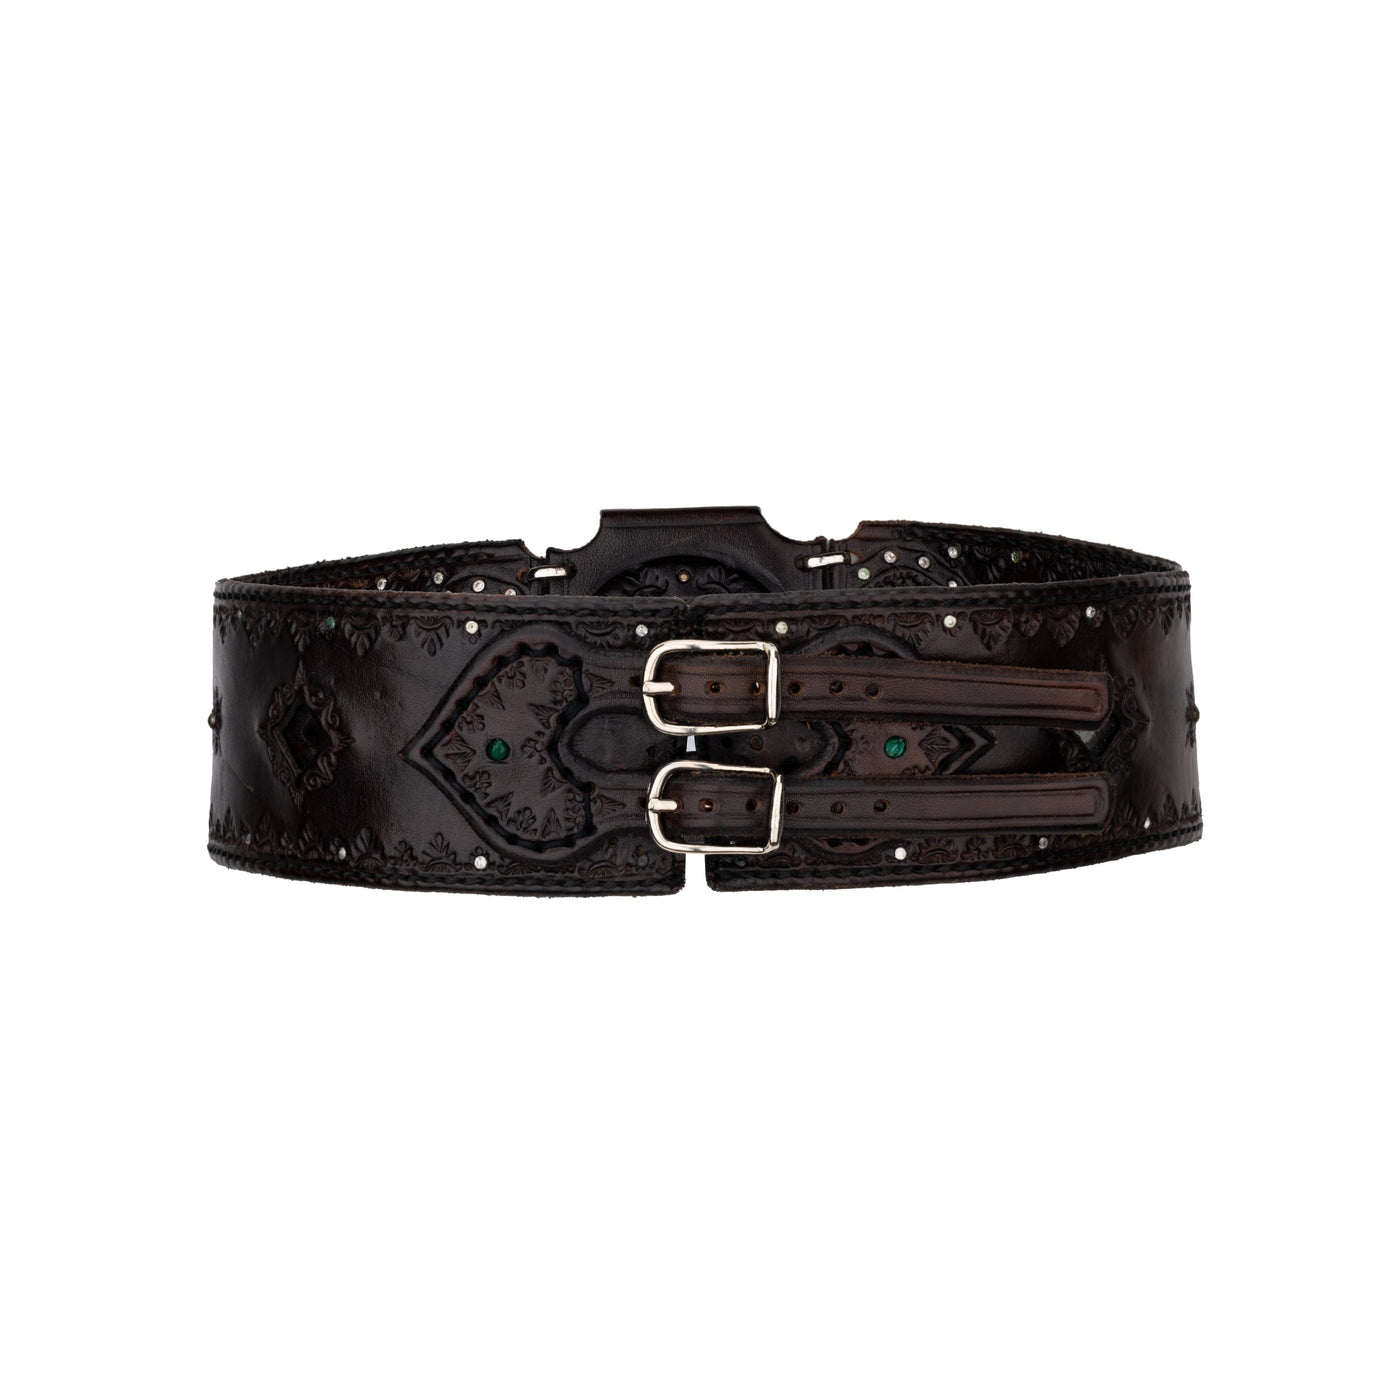 Collection Privée brown leather belt. Bandeau style with back fastening, decorated with mini studs pre-owned